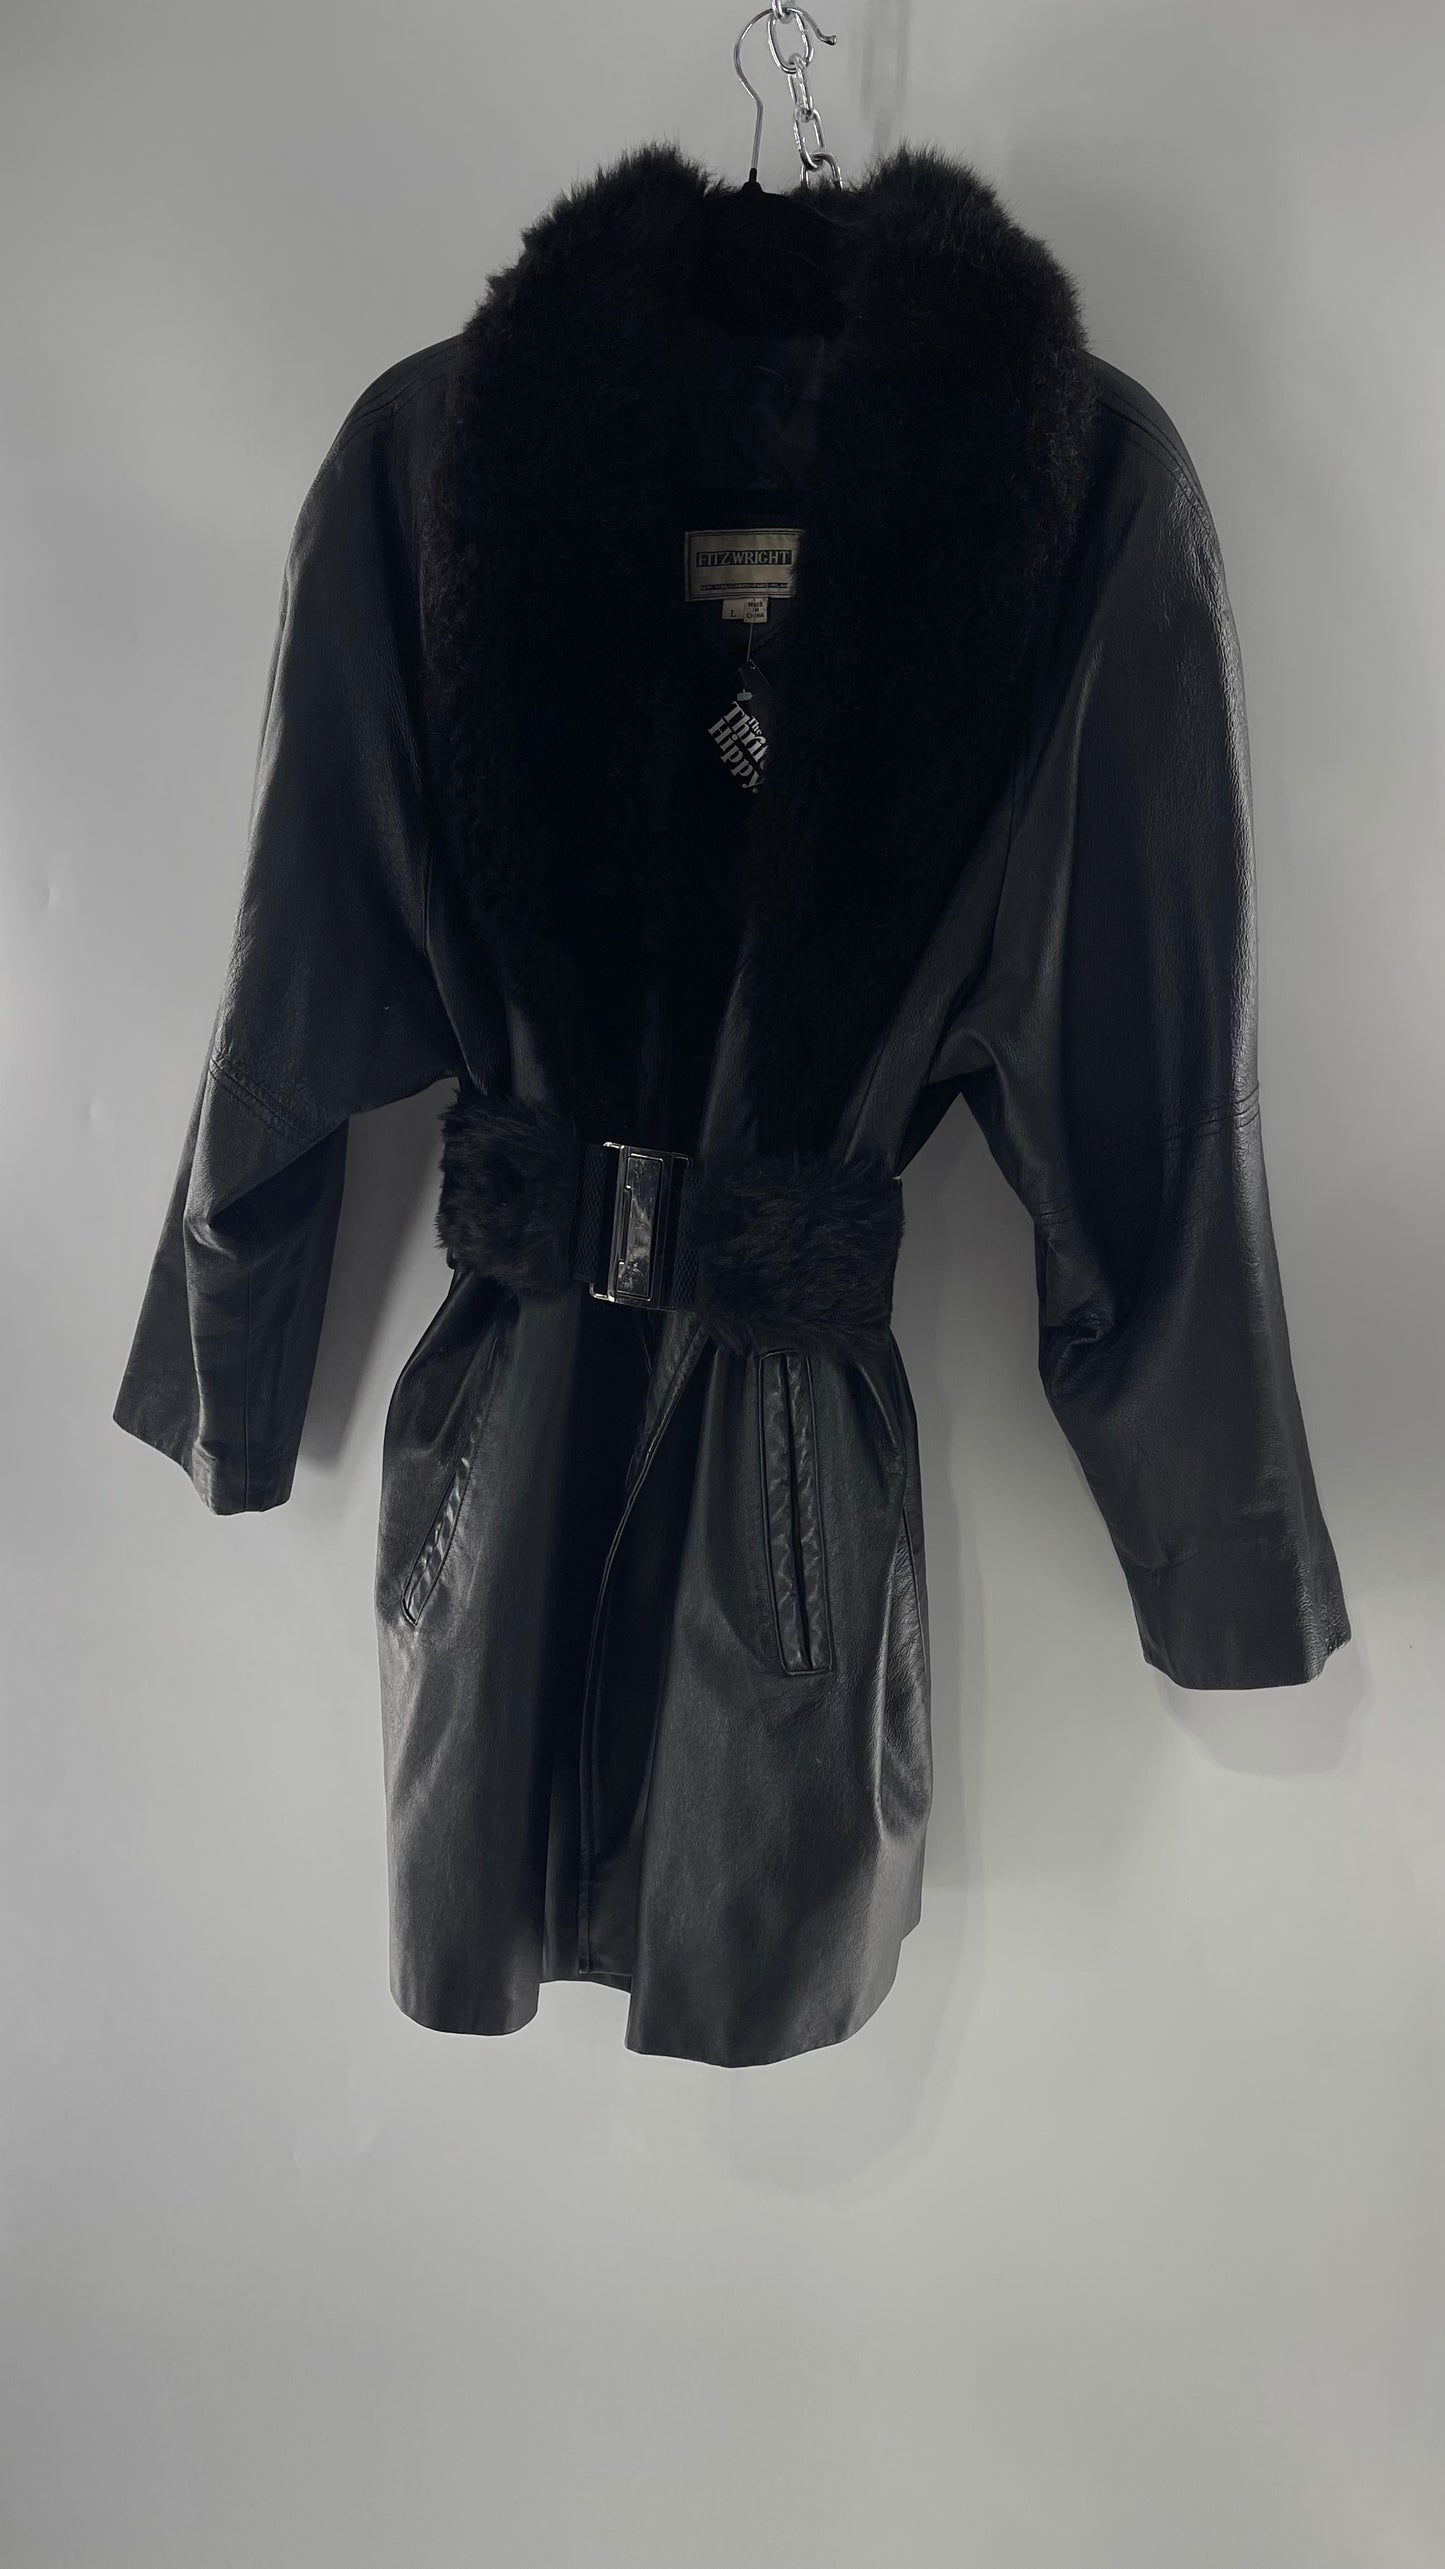 FITZWRIGHT Vintage Black Leather Coat with New Zealand Opposum Fur Collar and Faux Fur Belt  (C)(Large)